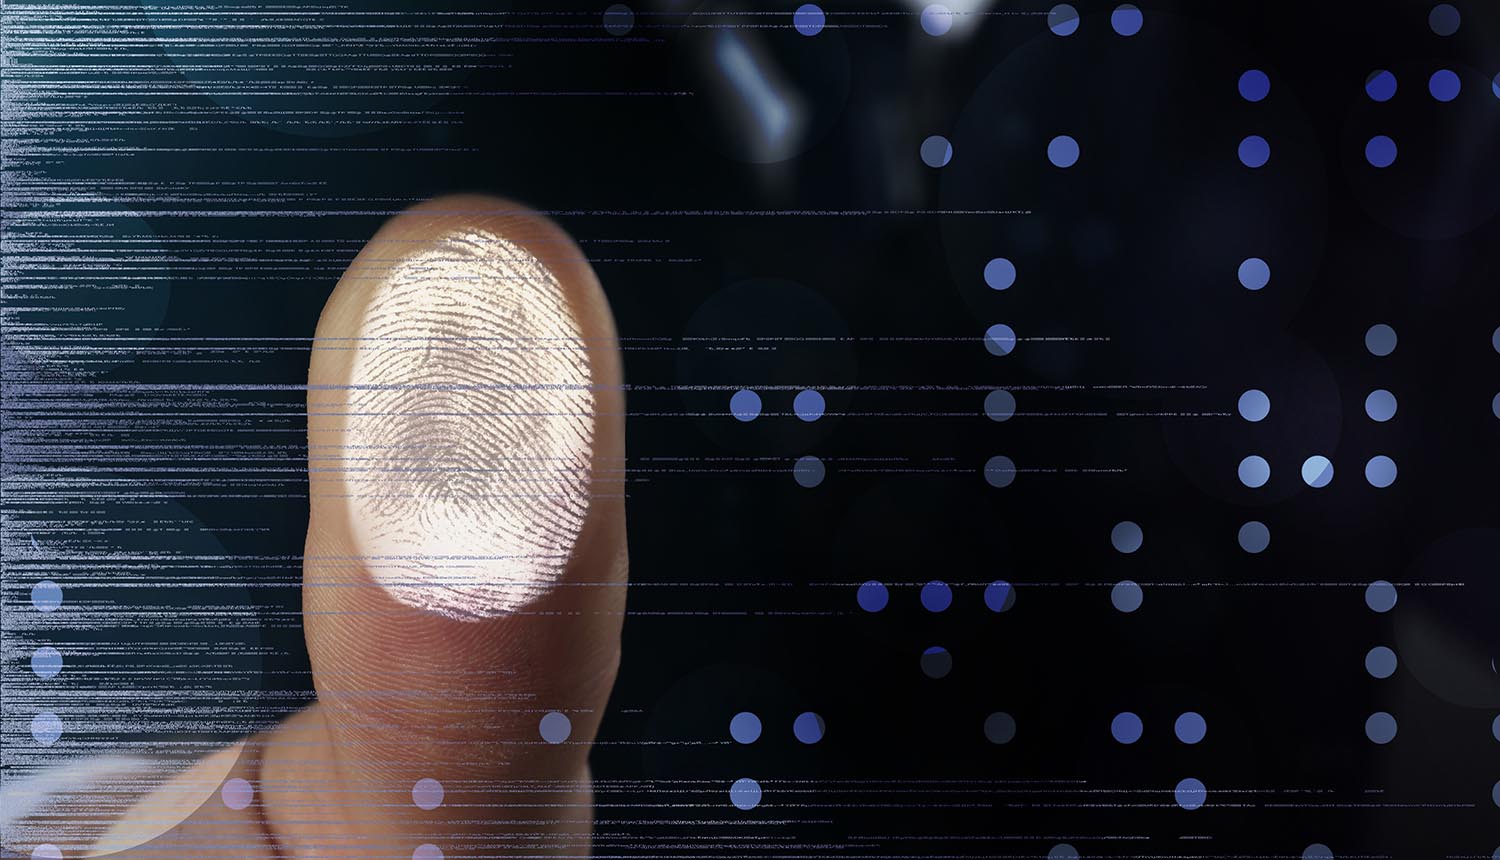 How Important is the Fingerprint in Identification and Detection?